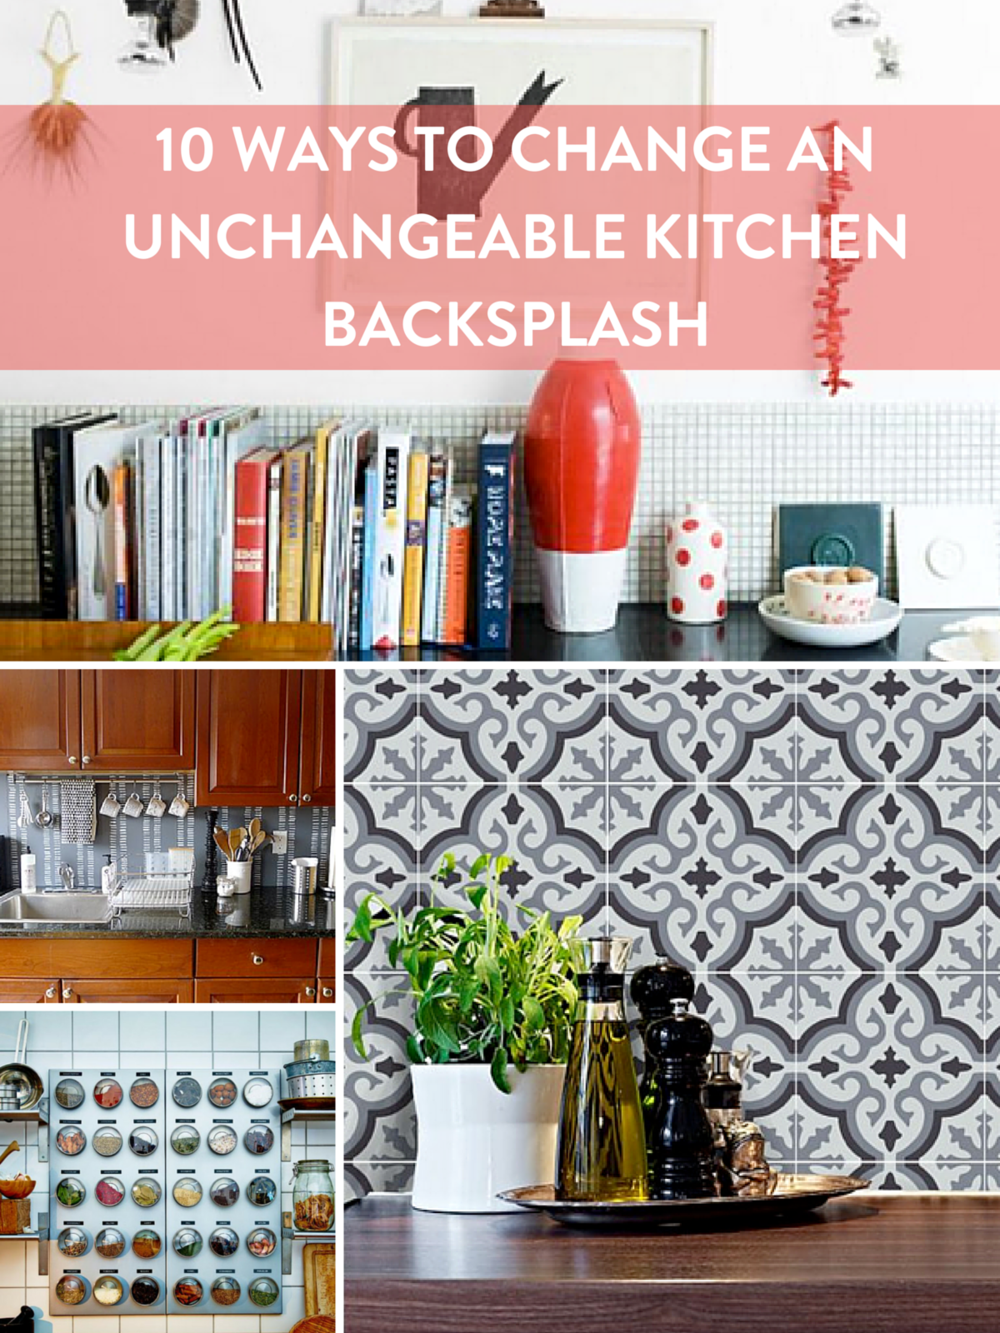 Temporary changes for an unchangeable kitchen backsplash